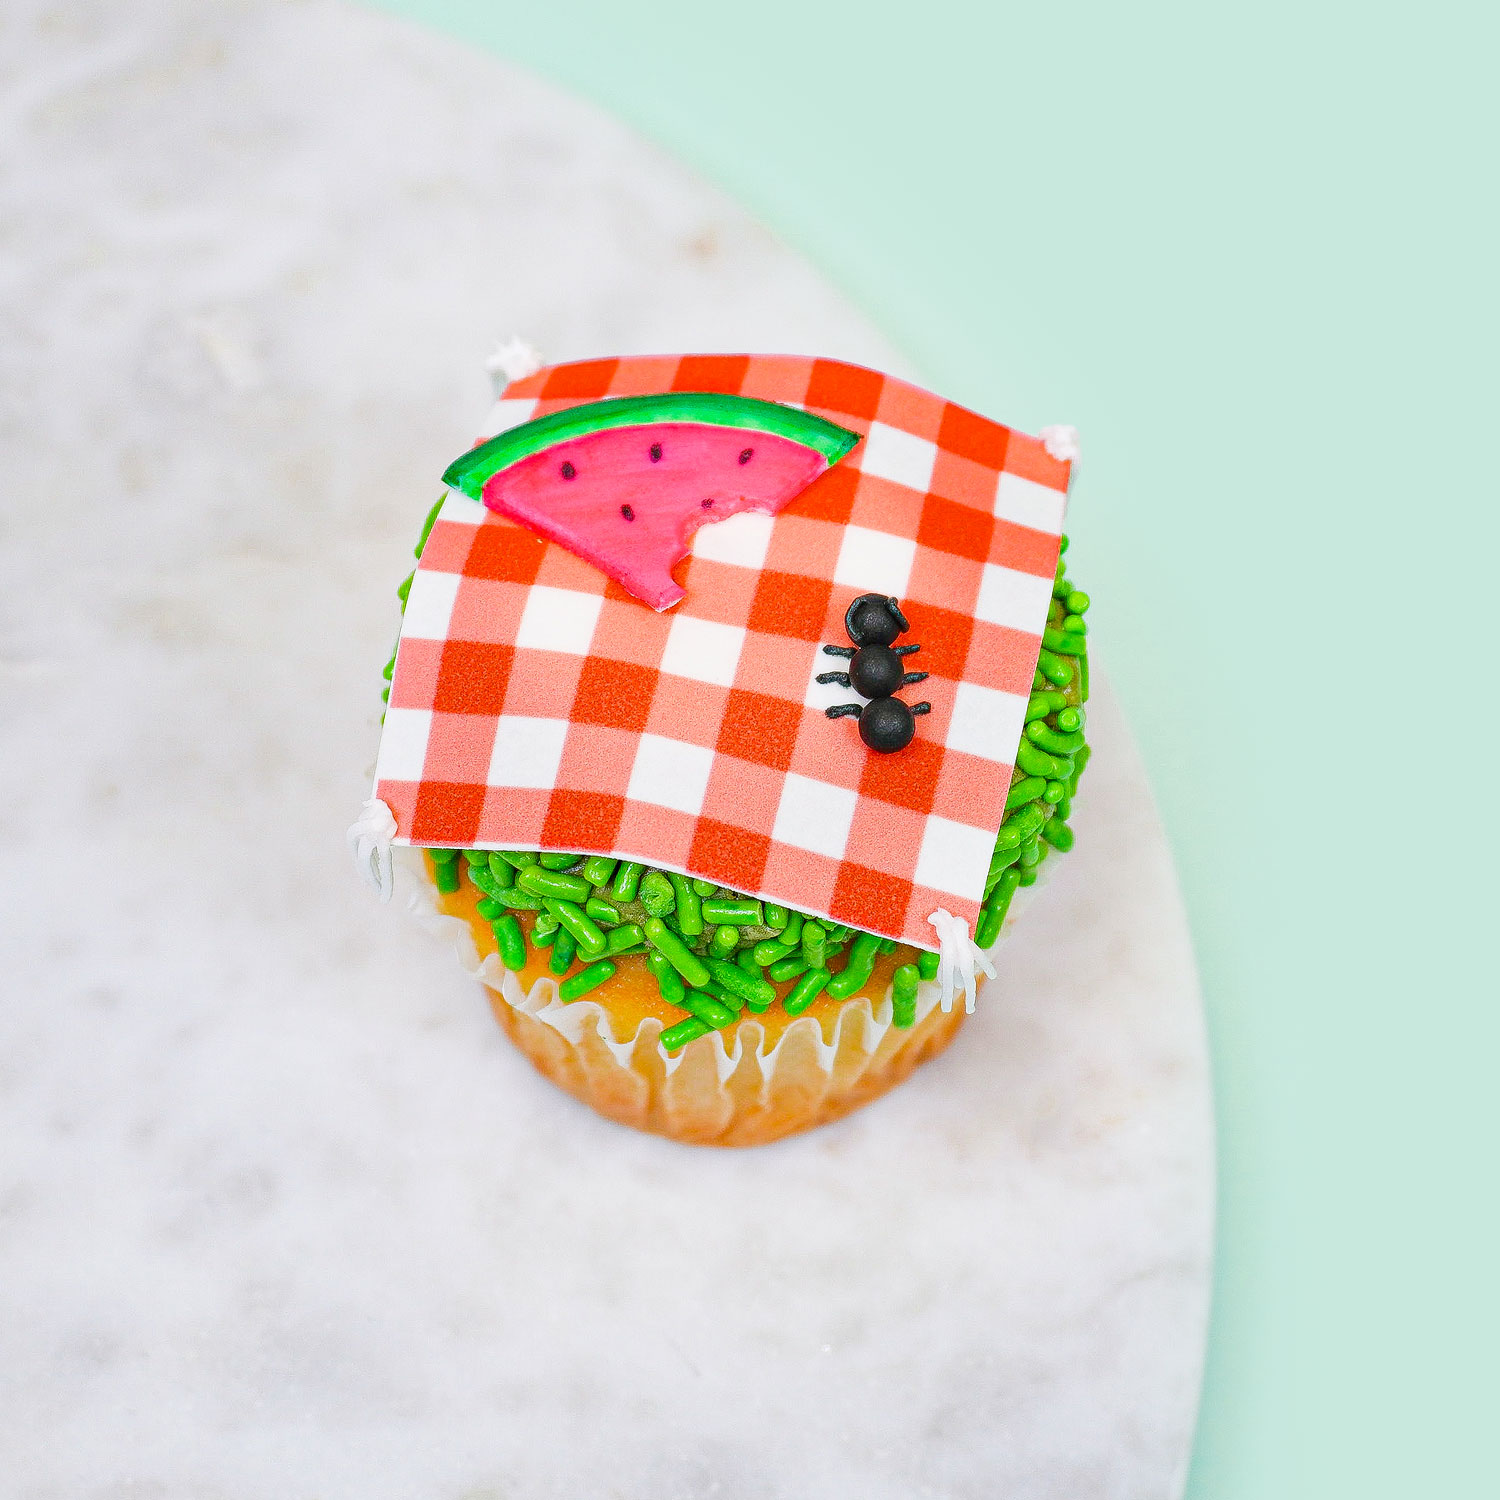 cupcake decorated to look like a picnic table